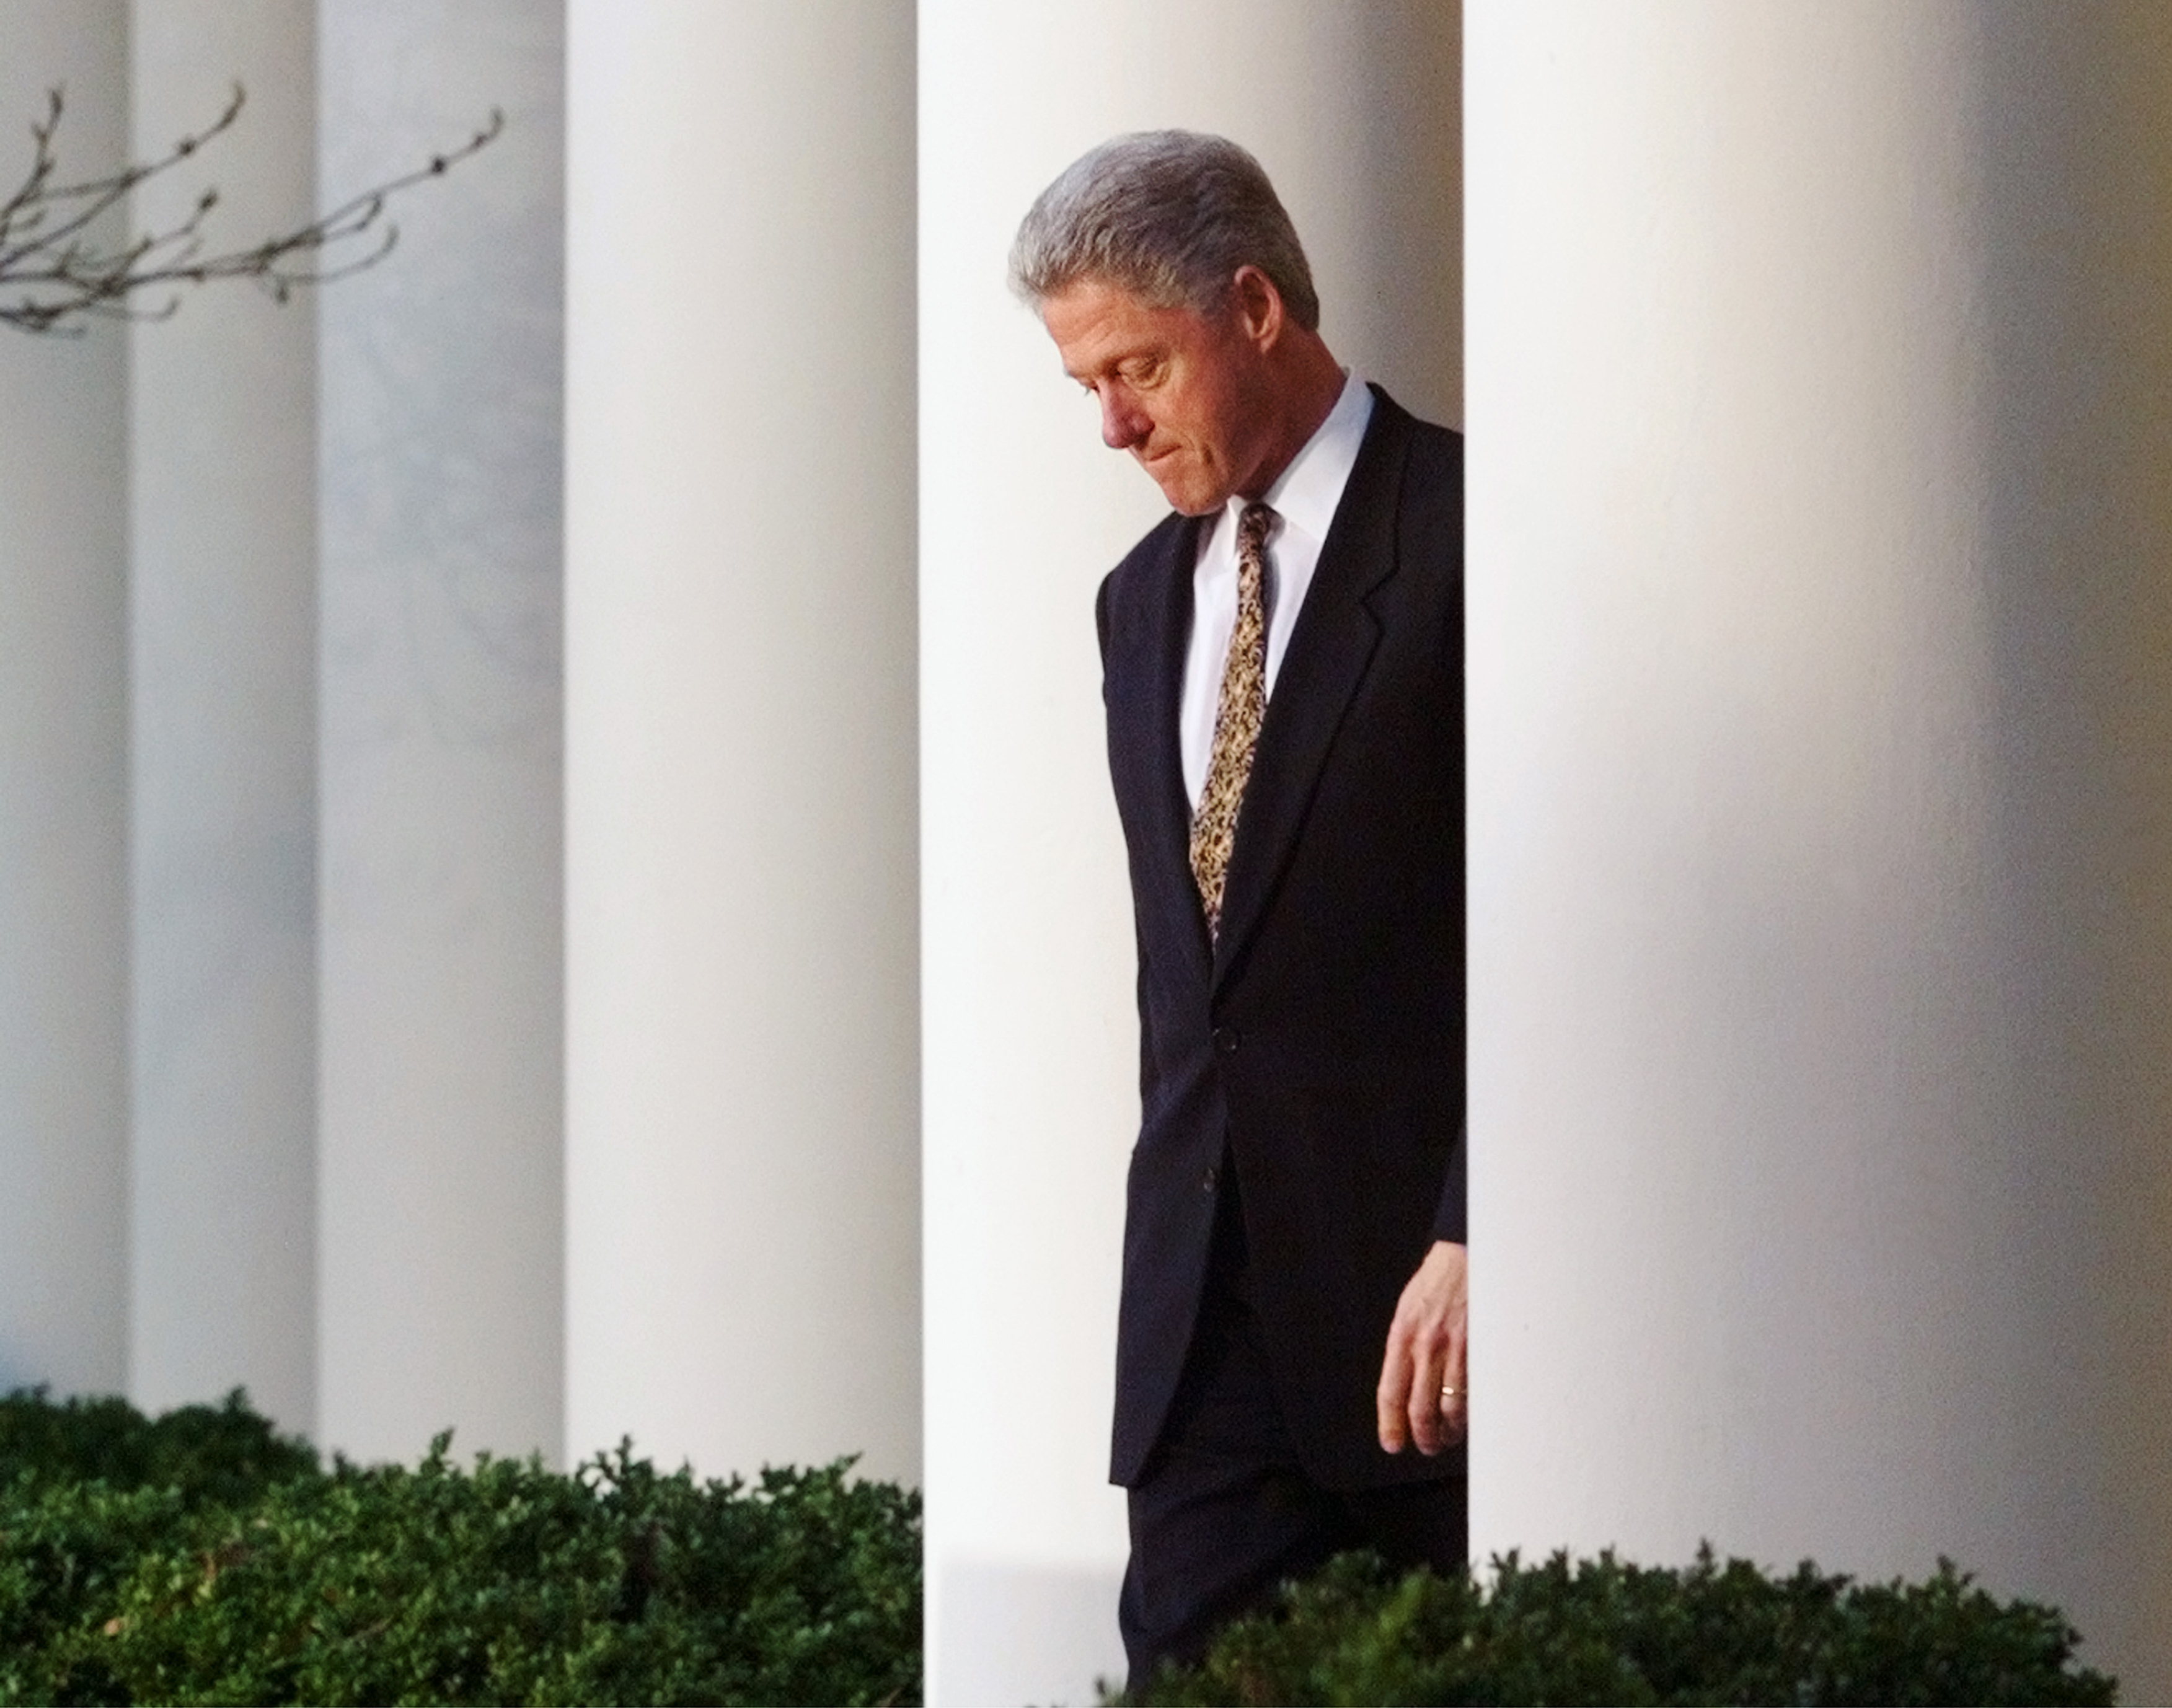 President Clinton walks to the podium in the White House Rose Garden to make a statement on the House impeachment inquiry on Dec. 11, 1998. The president apologized to the country for his conduct and offered to accept congressional censure. (AP Photo/J. Scott Applewhite)